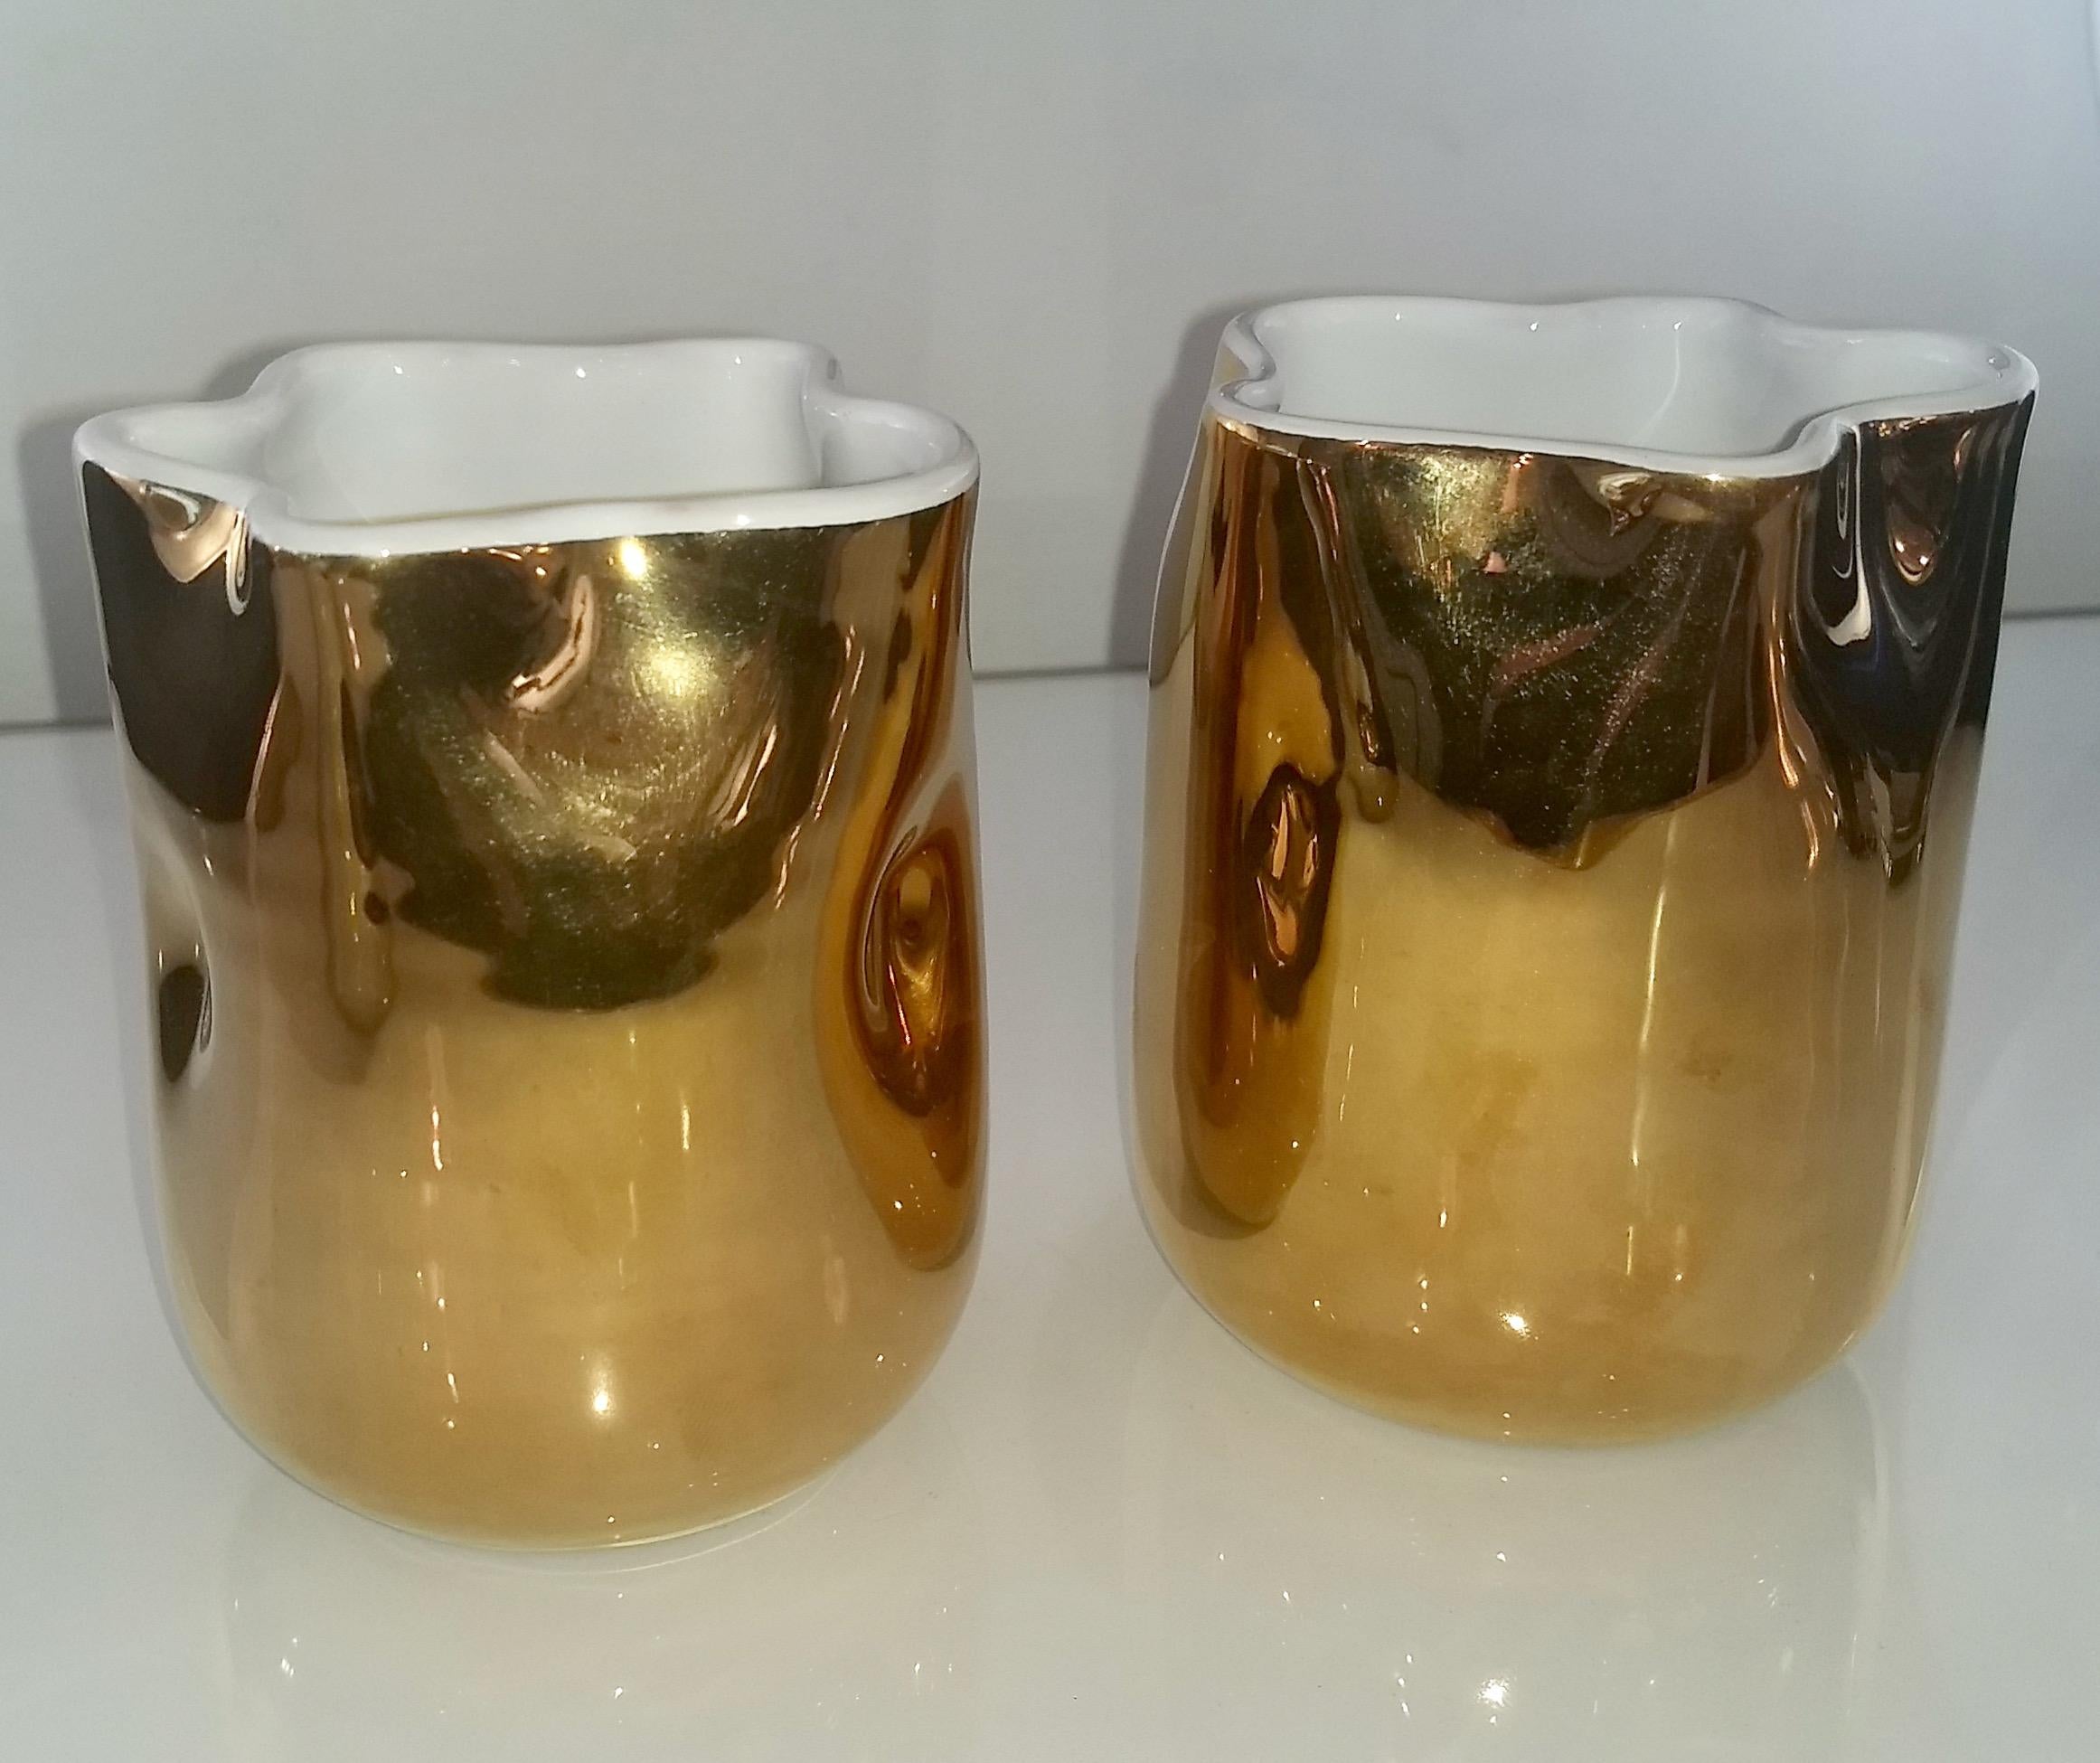 Contemporary Italian White Ceramic Tumbler Decorated with Gold For Sale 1